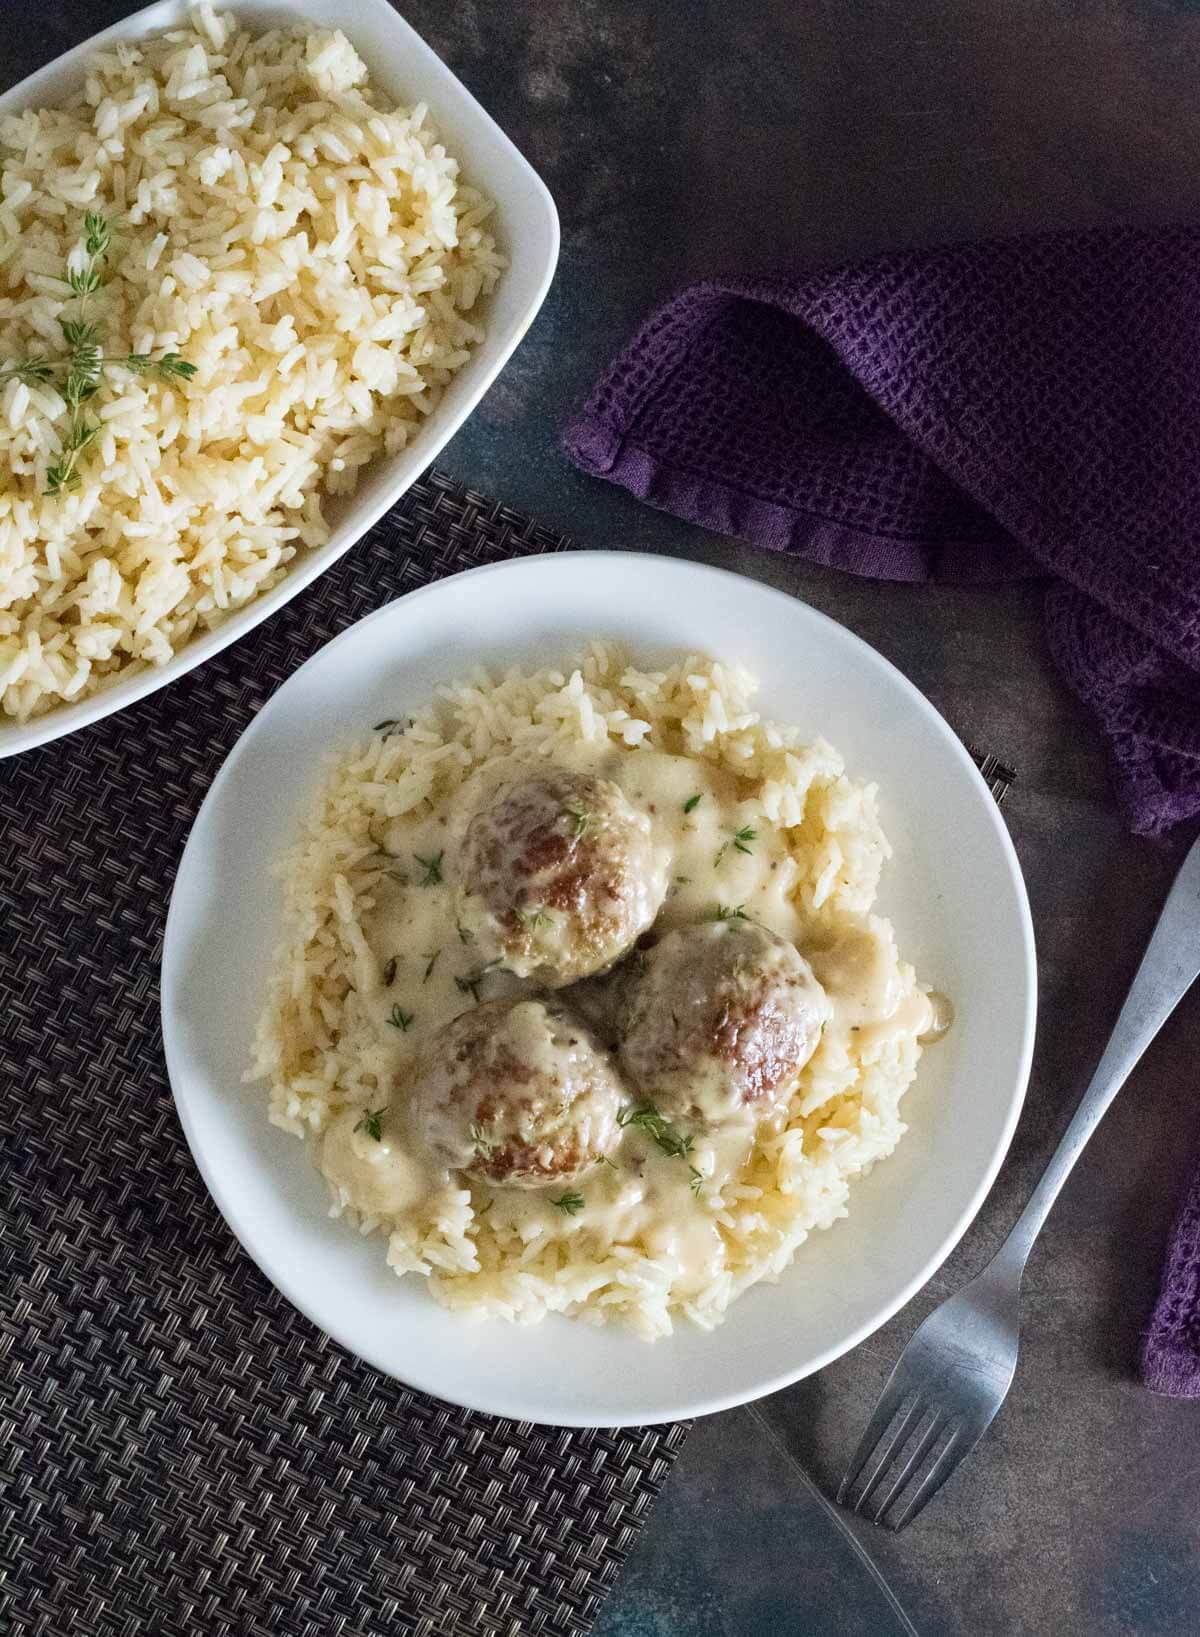 Meatballs and rice.